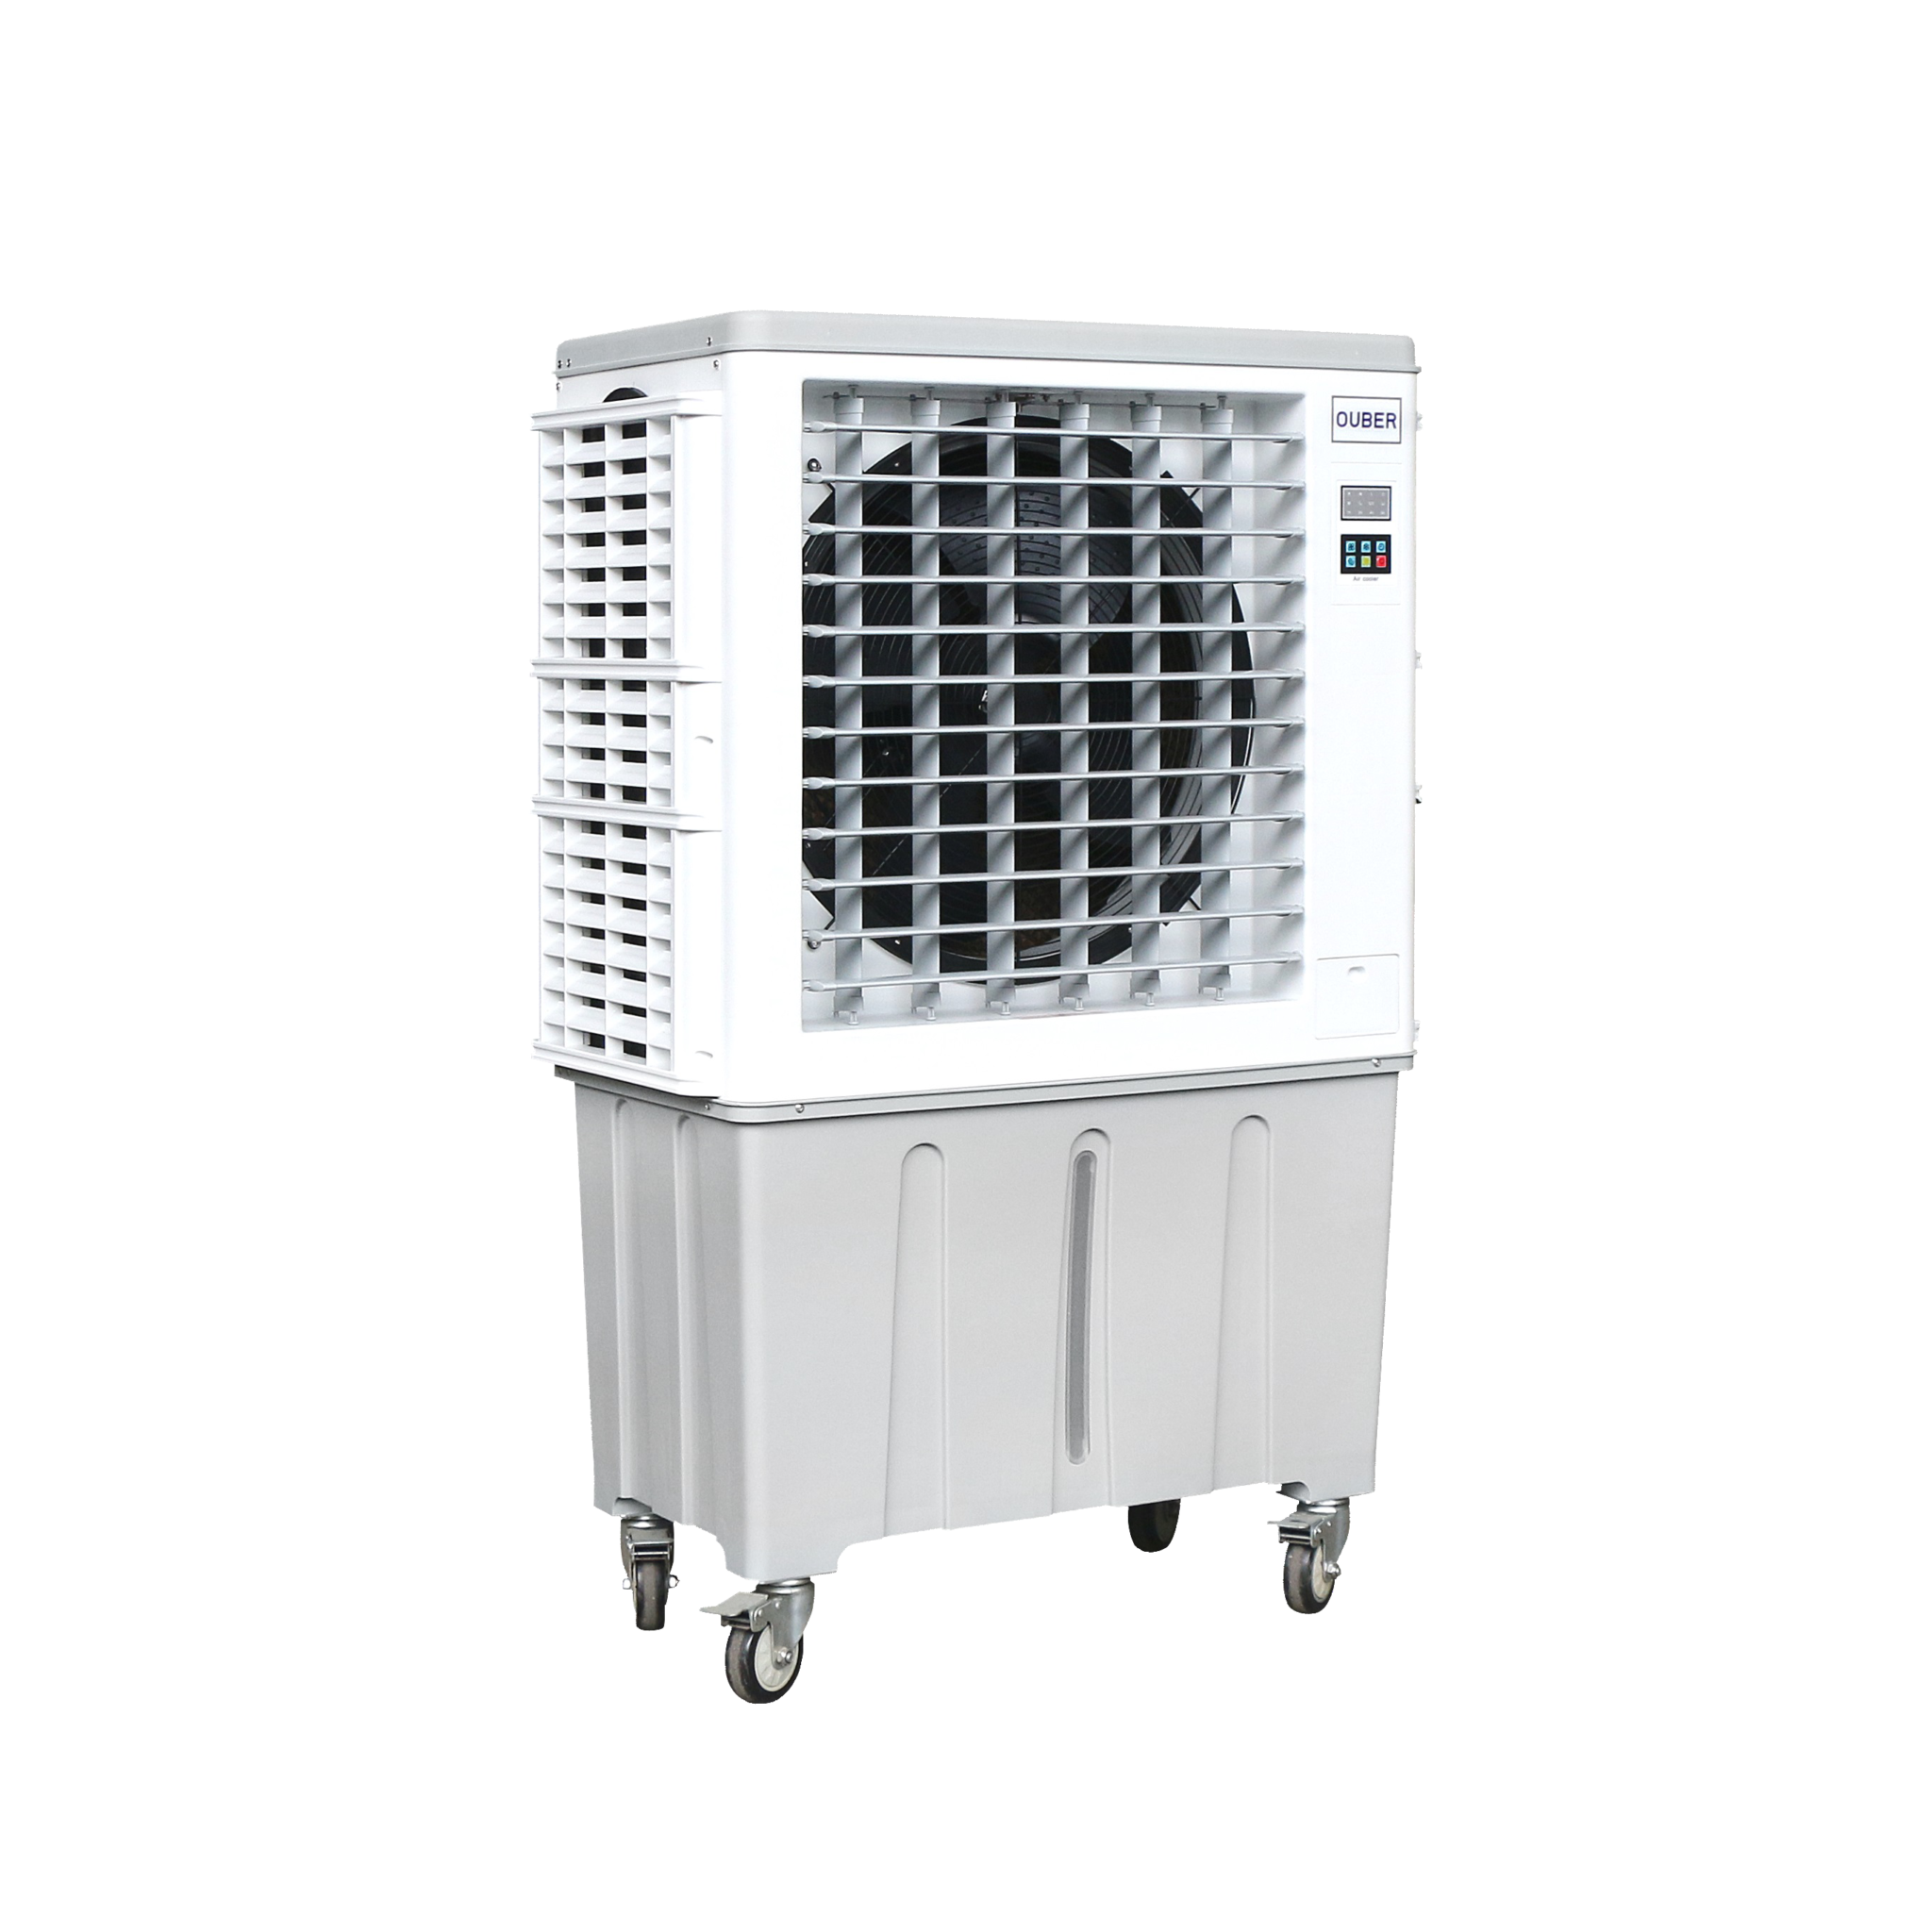 PAC280-A Portable Evaporative Air Cooler / Industrial Heating Cooling Ventilation Distribution Fans Warehouse Australia / Fanmaster